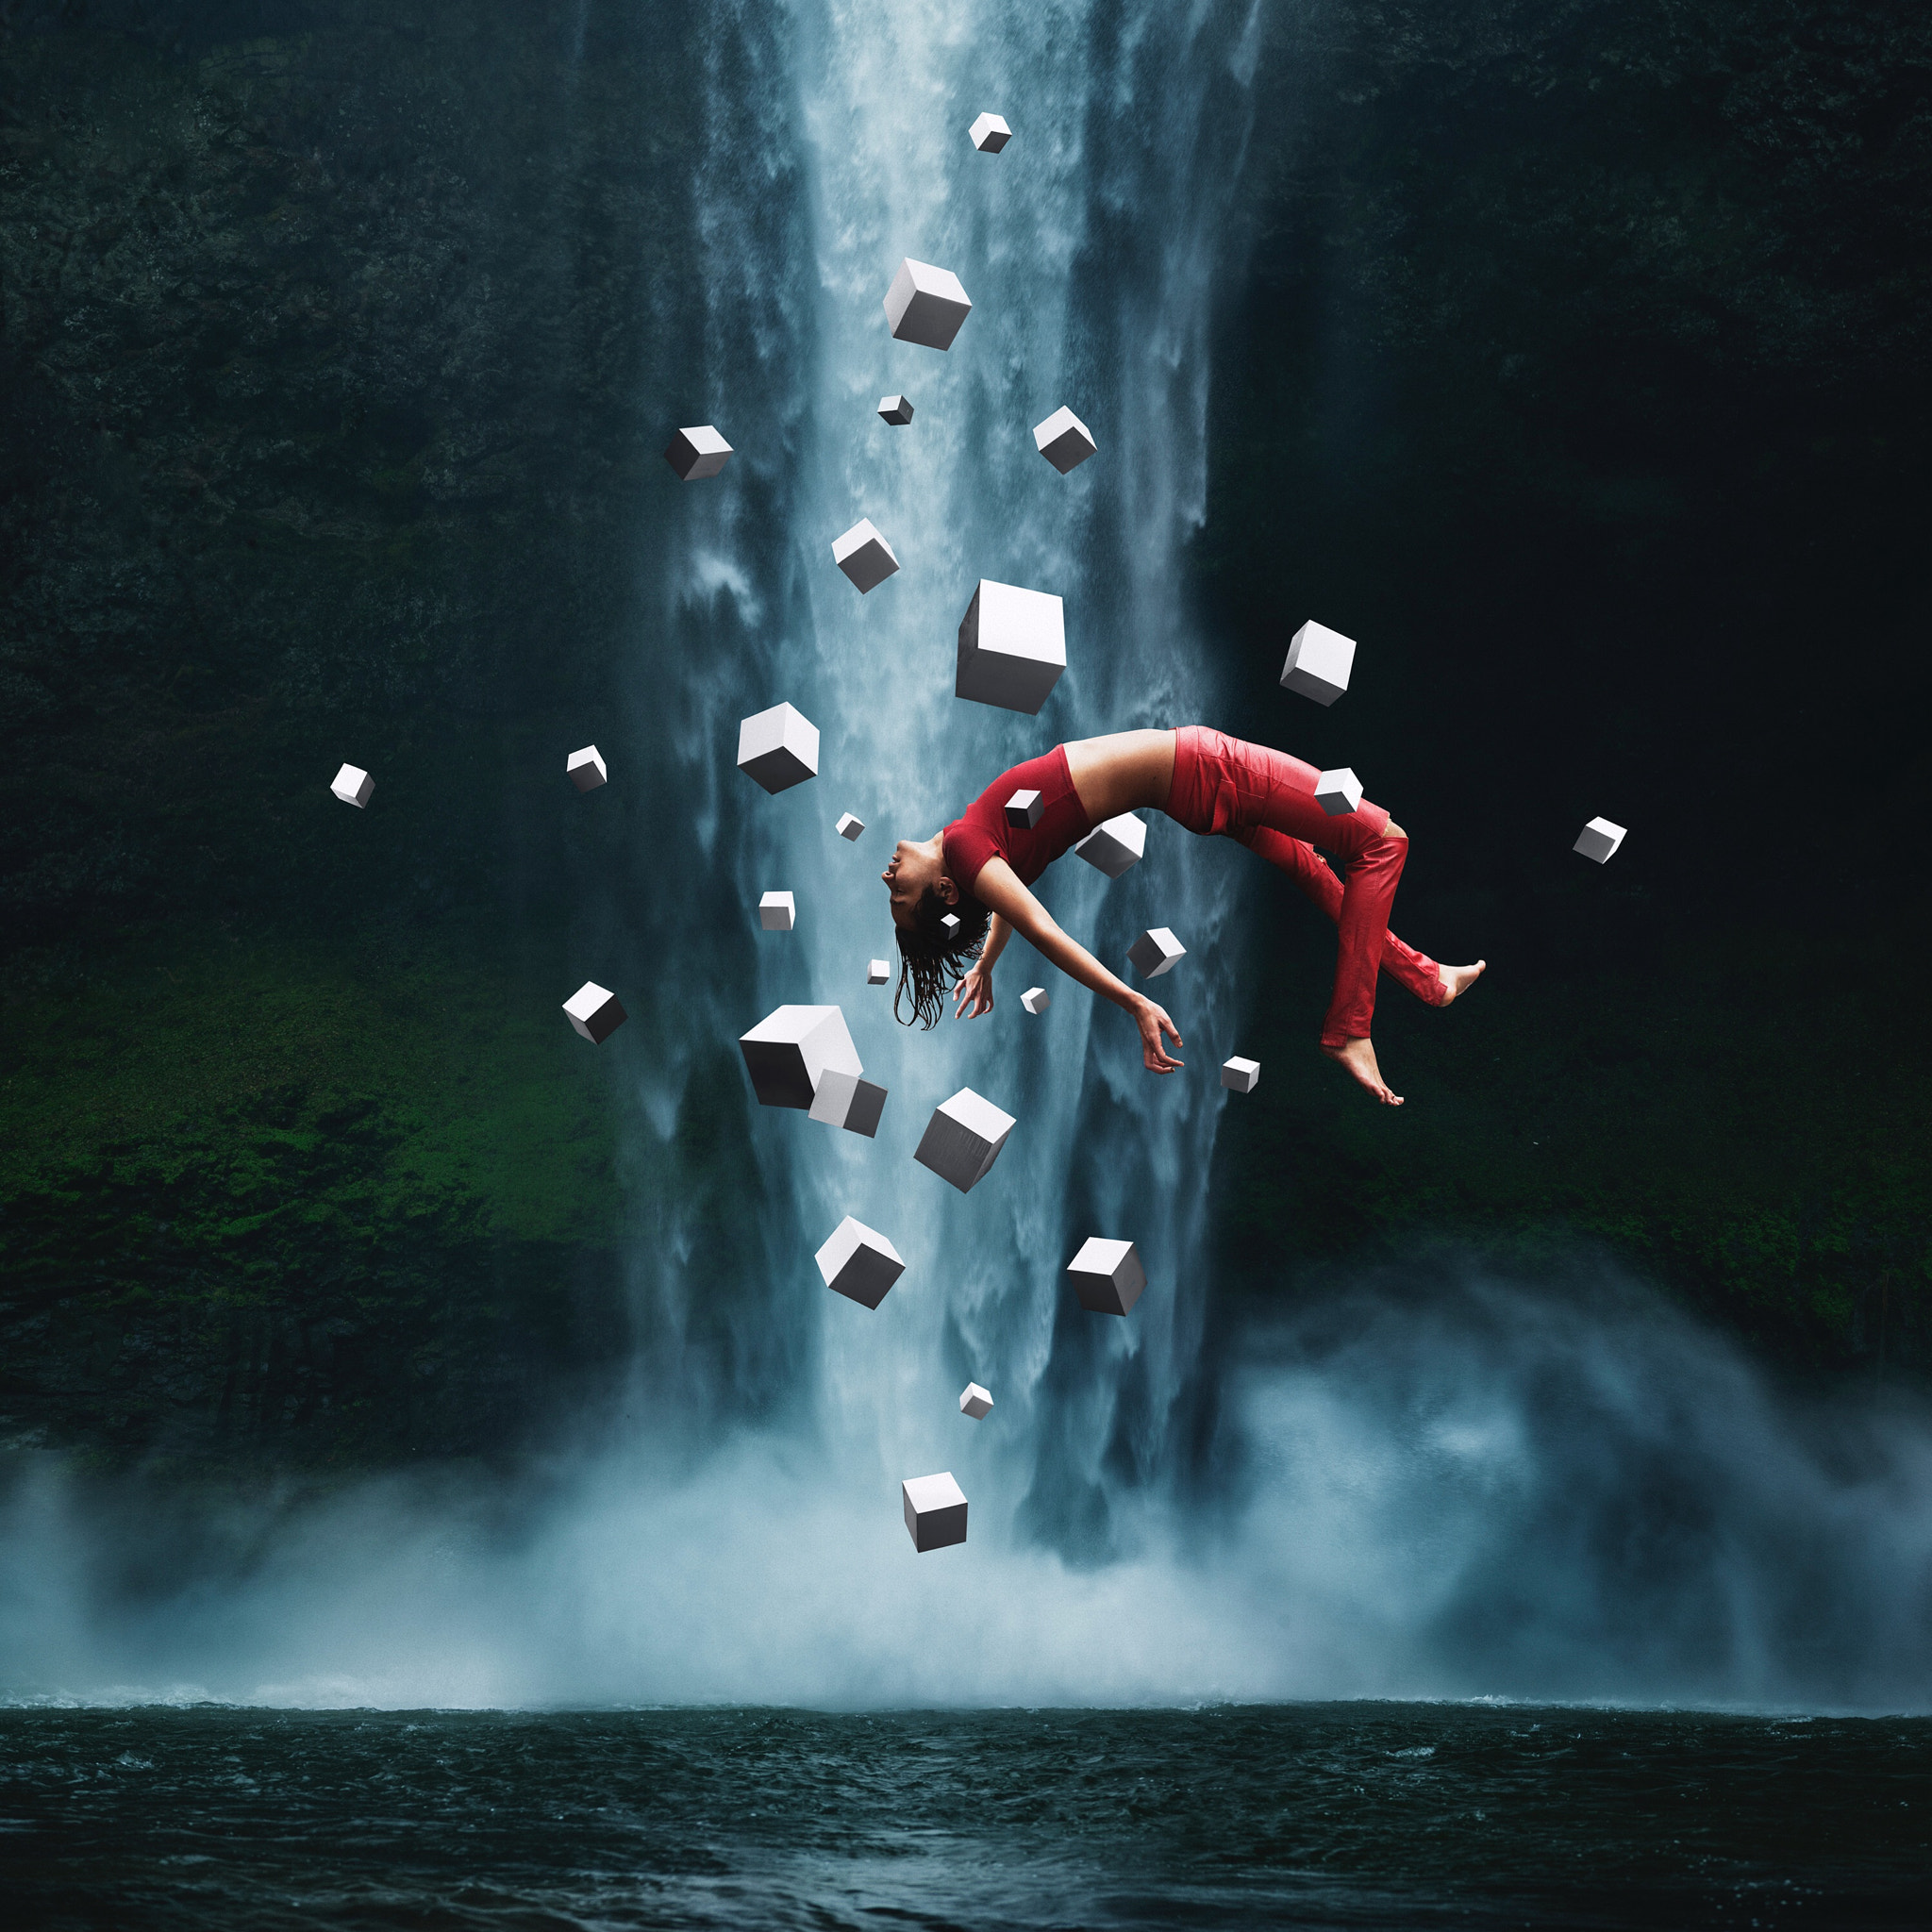 How to Create Gravity-Defying Photos Without Photoshop